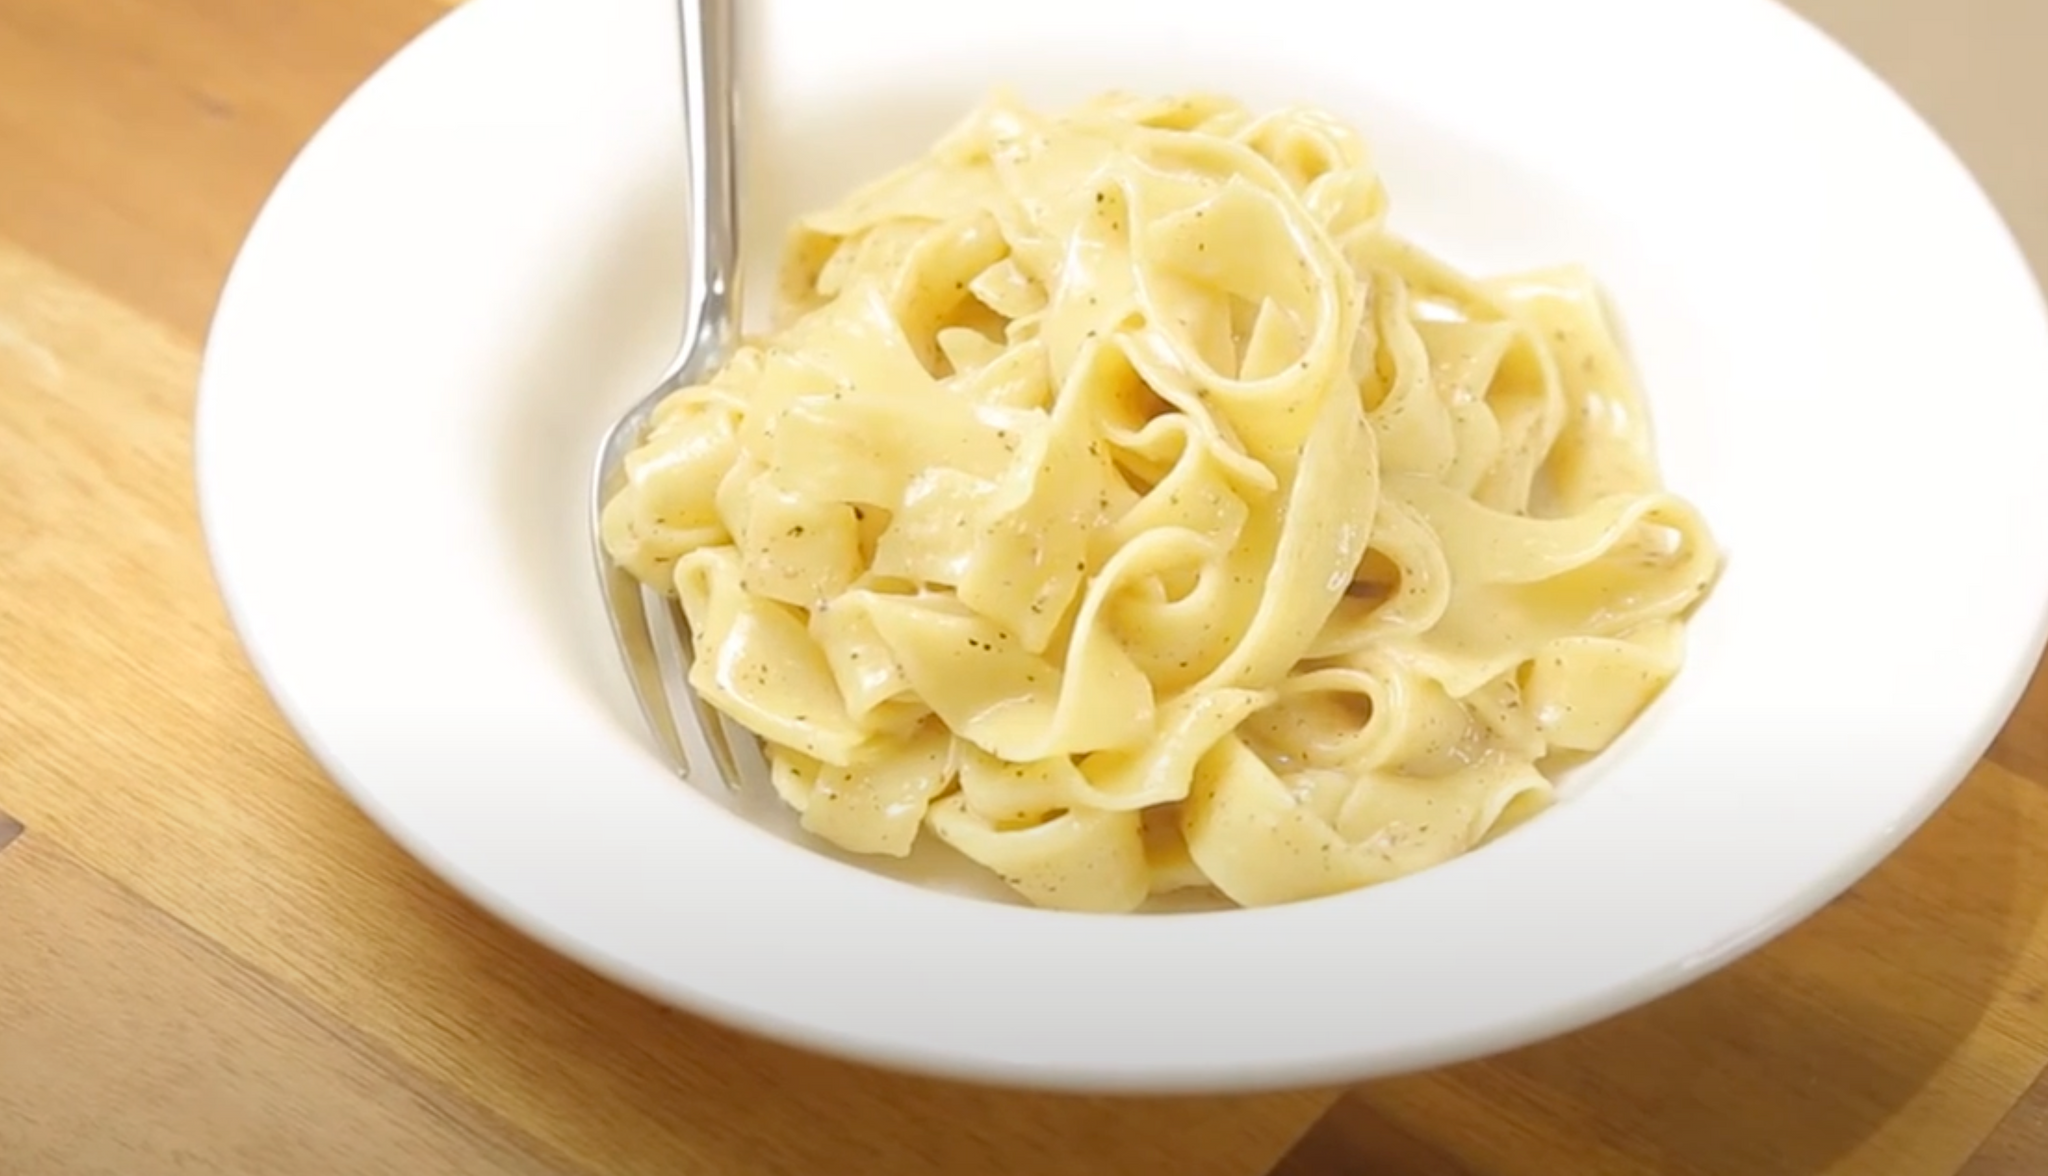 Fettuccine with Cheese and Pepper